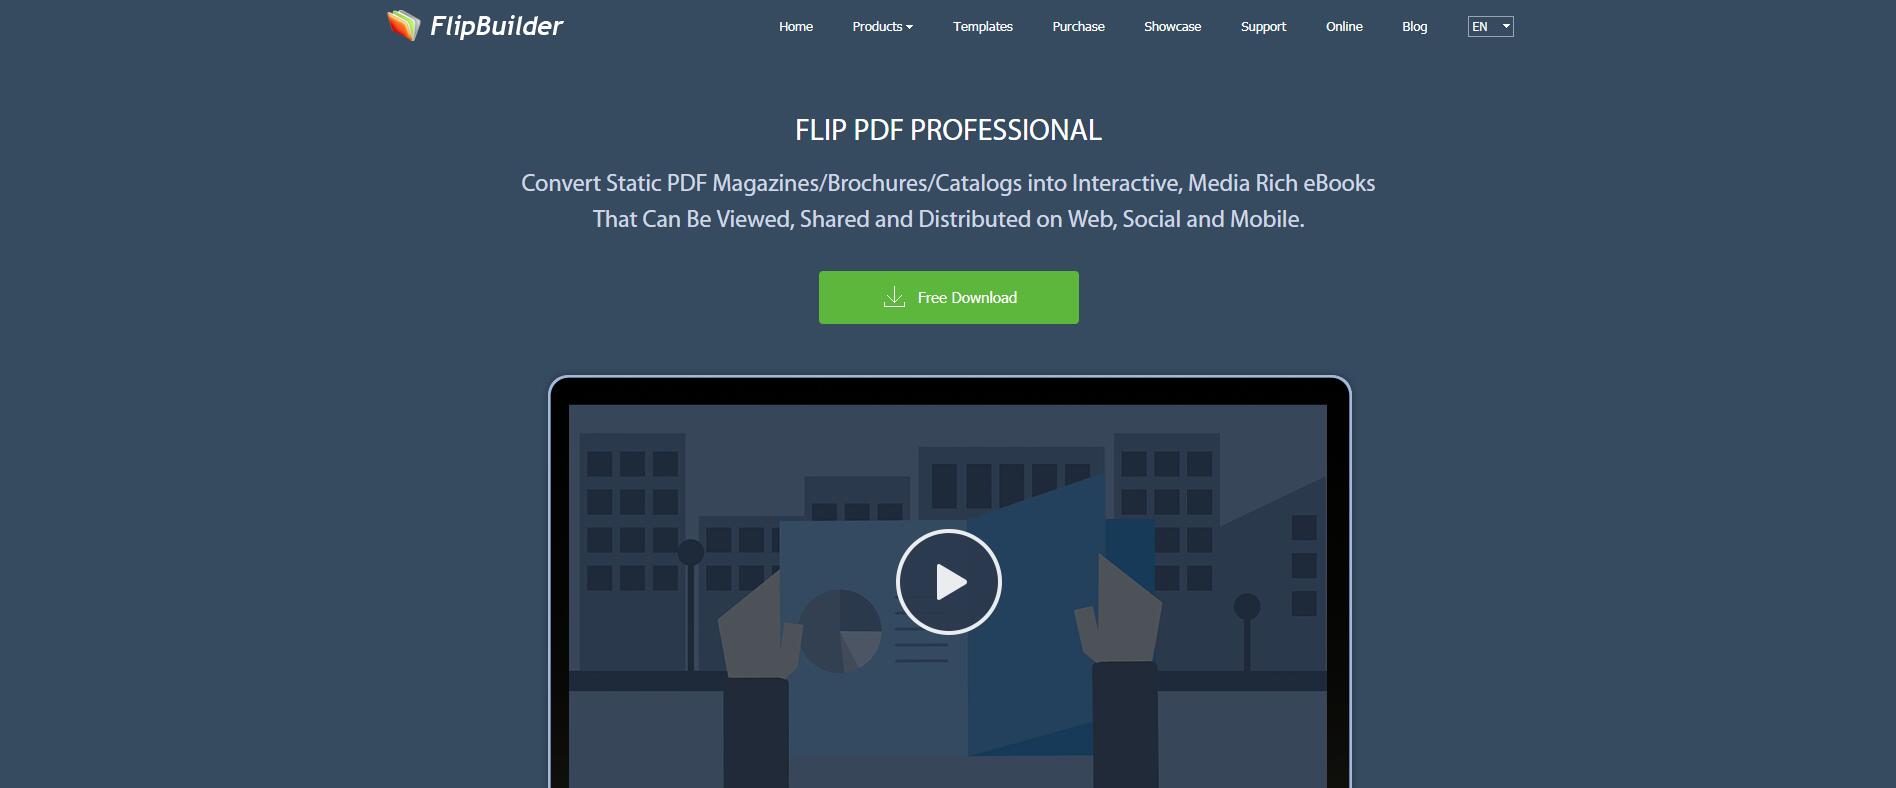 FlipBuilder Officially Releases New Flipbook Software for Windows and Mac 